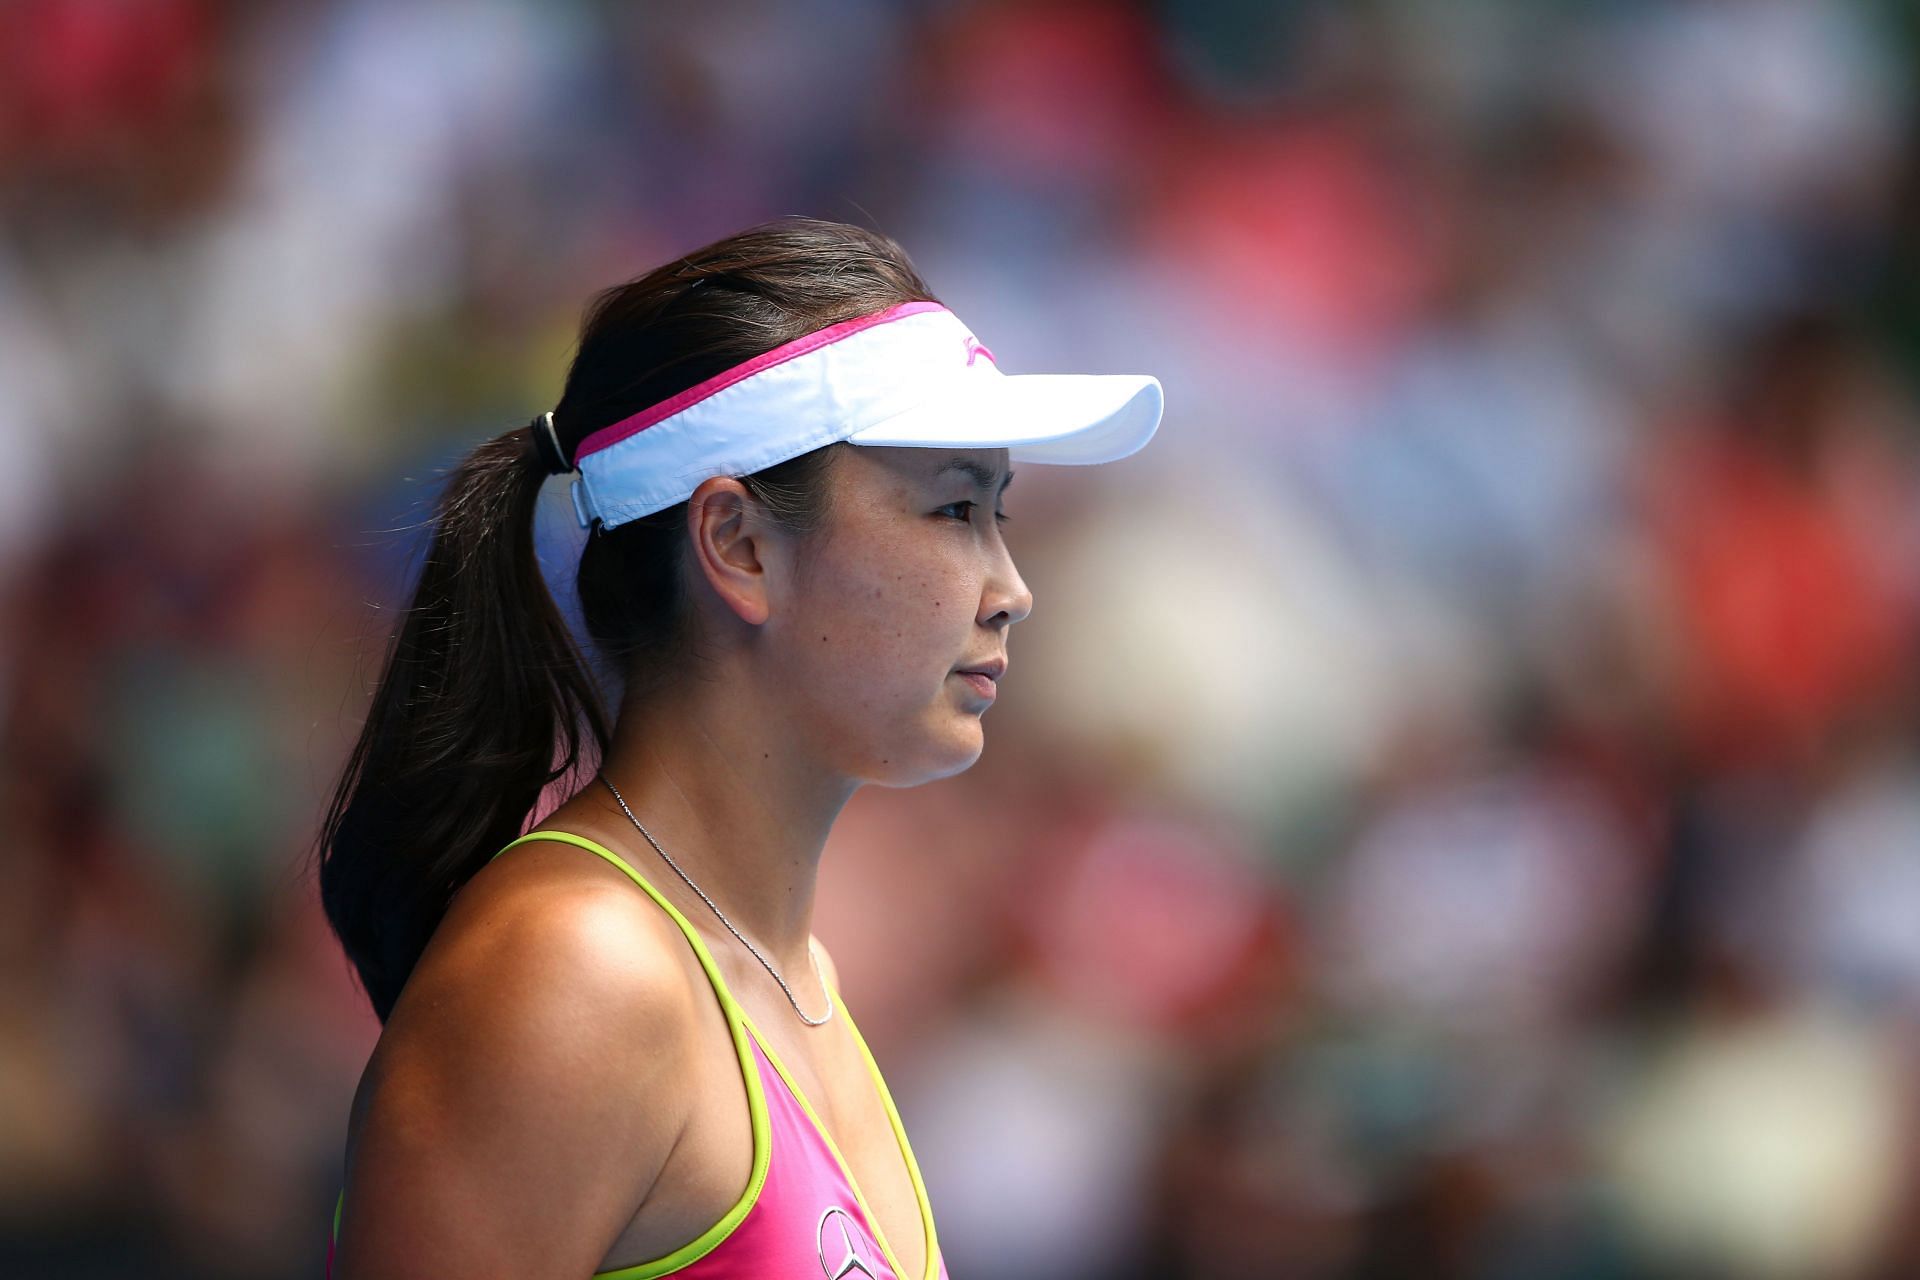 The tennis fraternity has been united in their support for Peng Shuai.